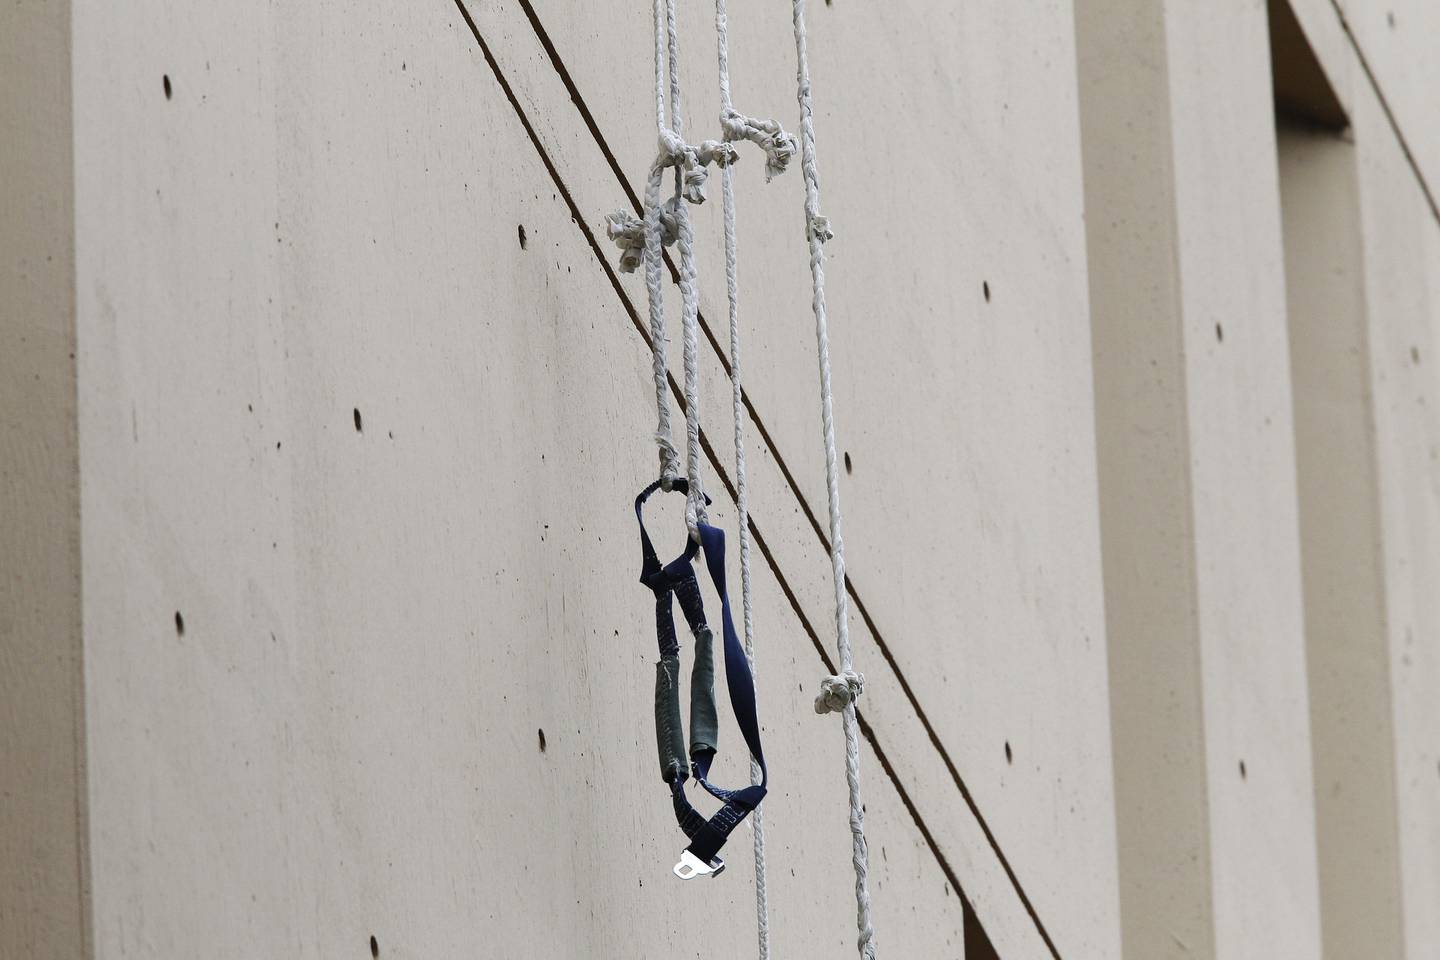 A rope dangles from about 15 stories up along the south side of the Metropolitan Correctional Center in Chicago after the escape by Jose Banks and Kenneth Conley.